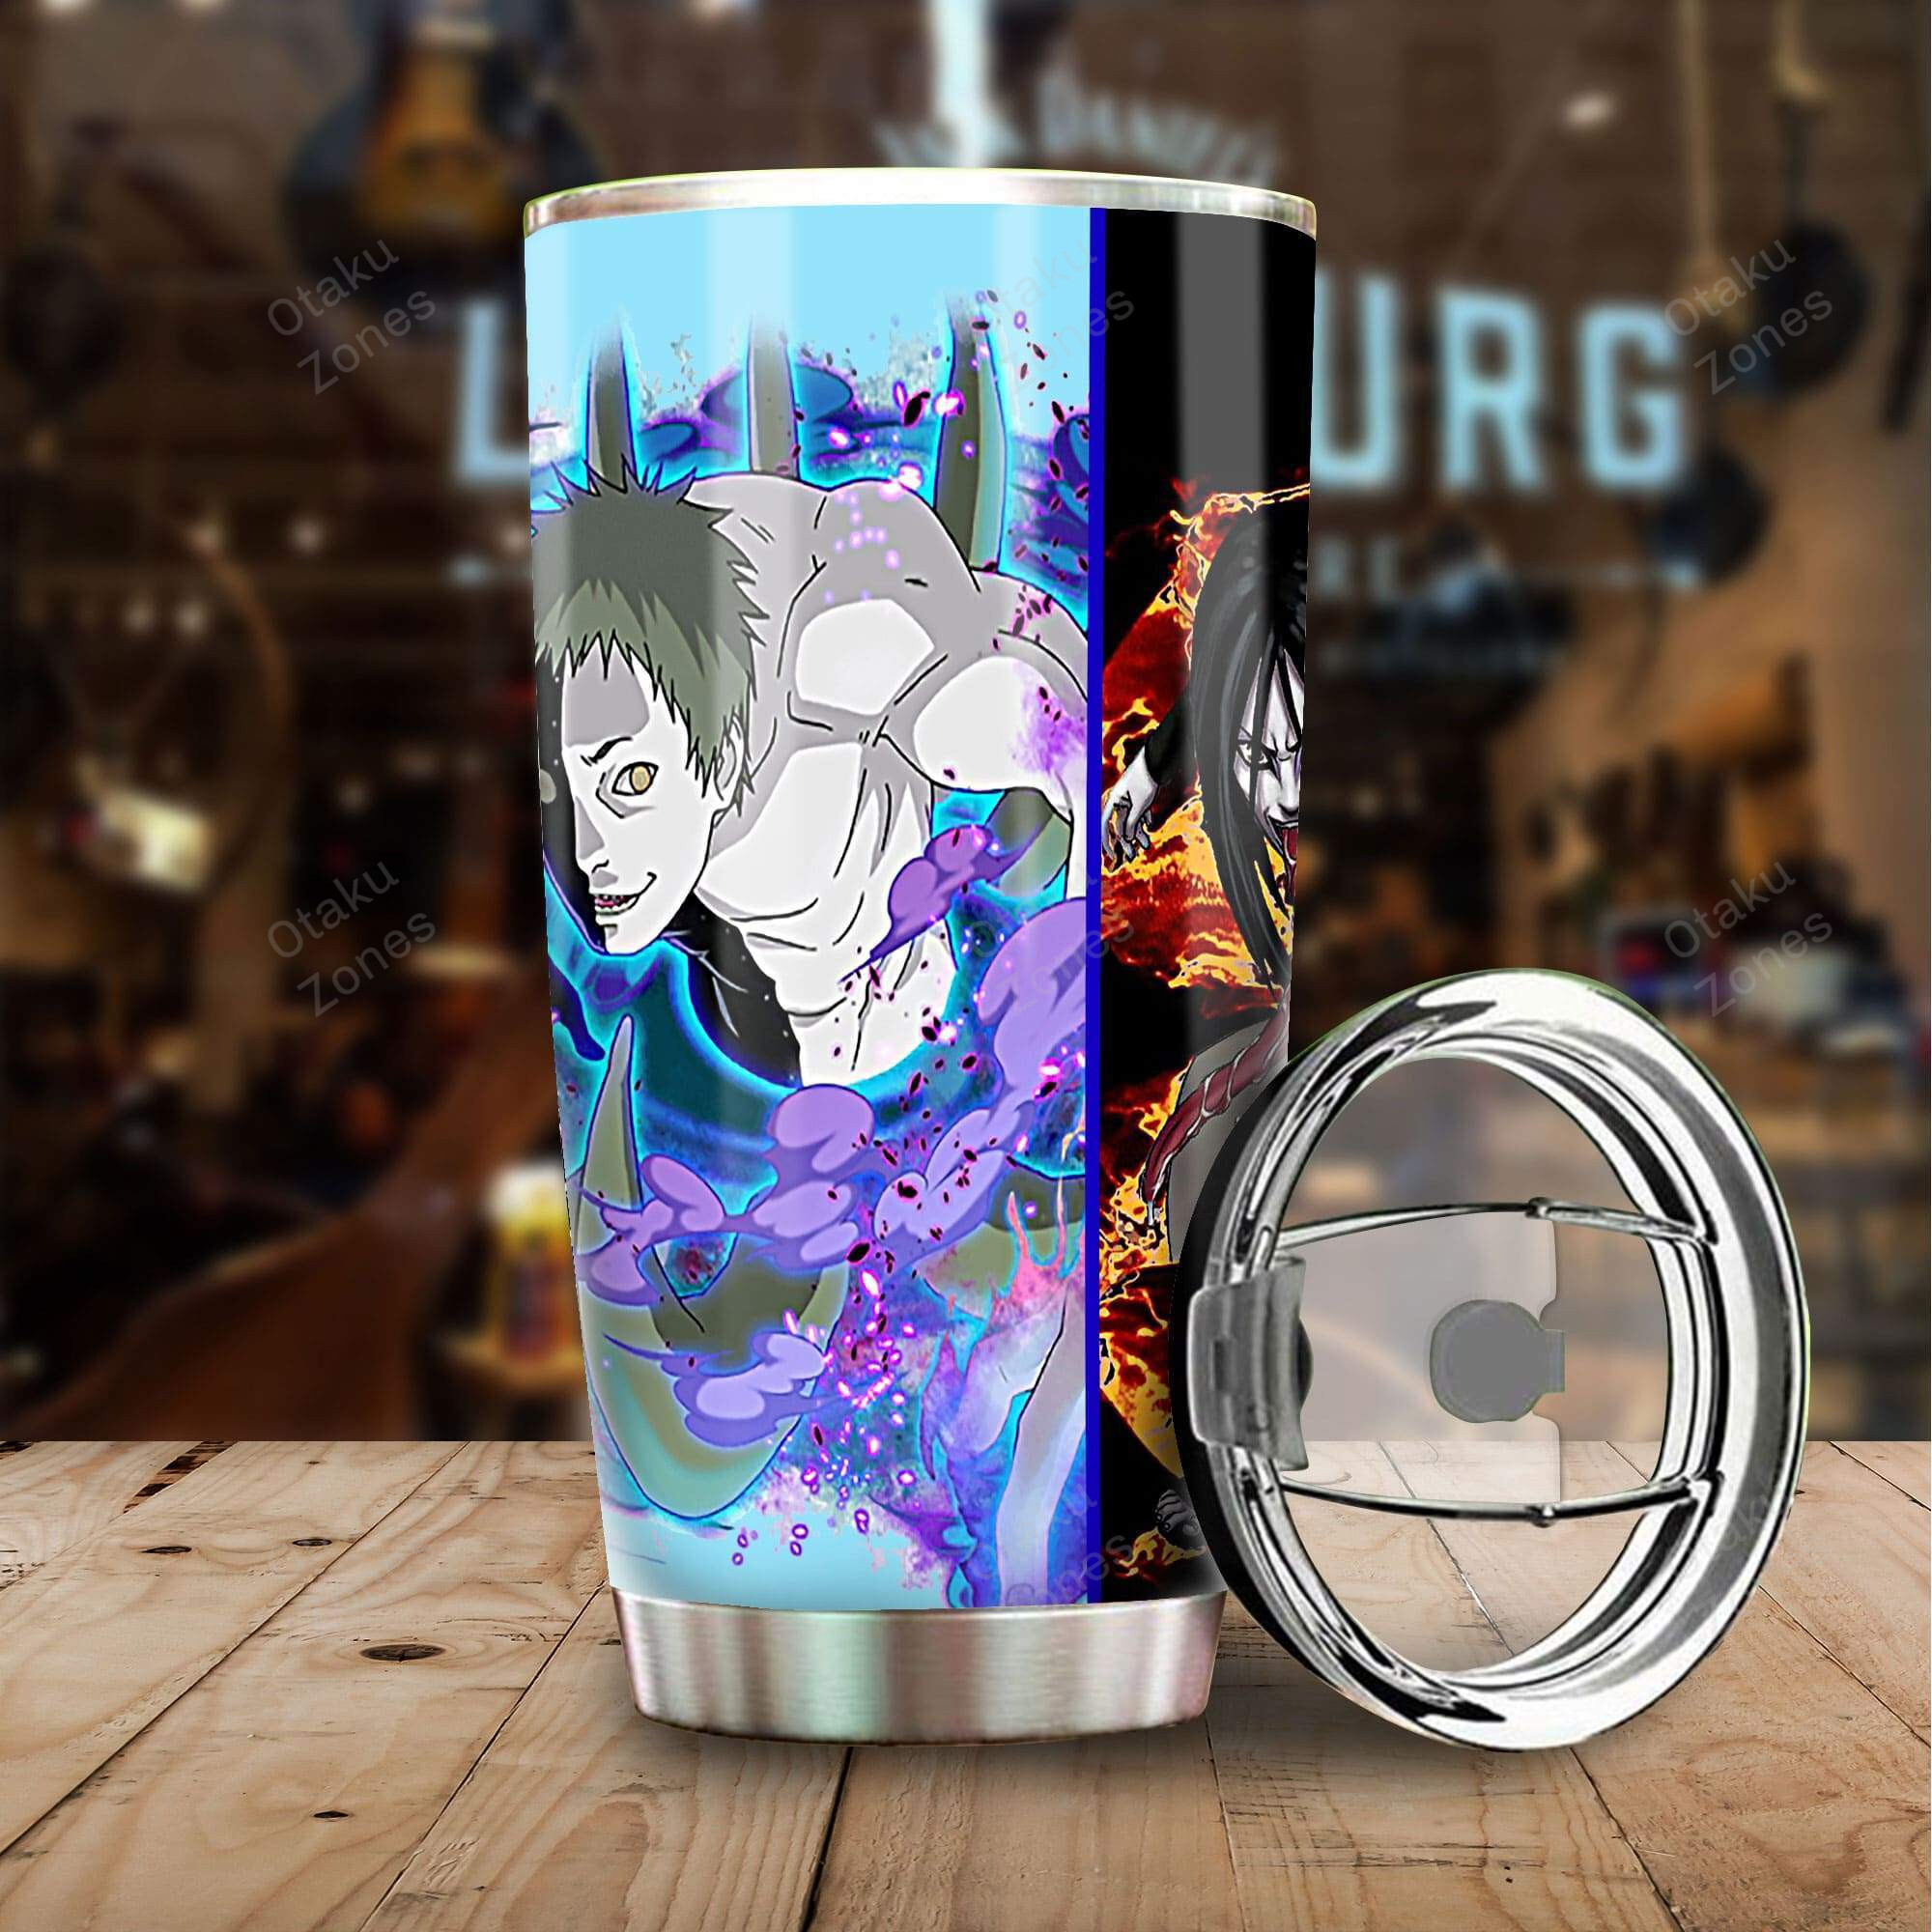 Go ahead and order your new tumbler now! 9